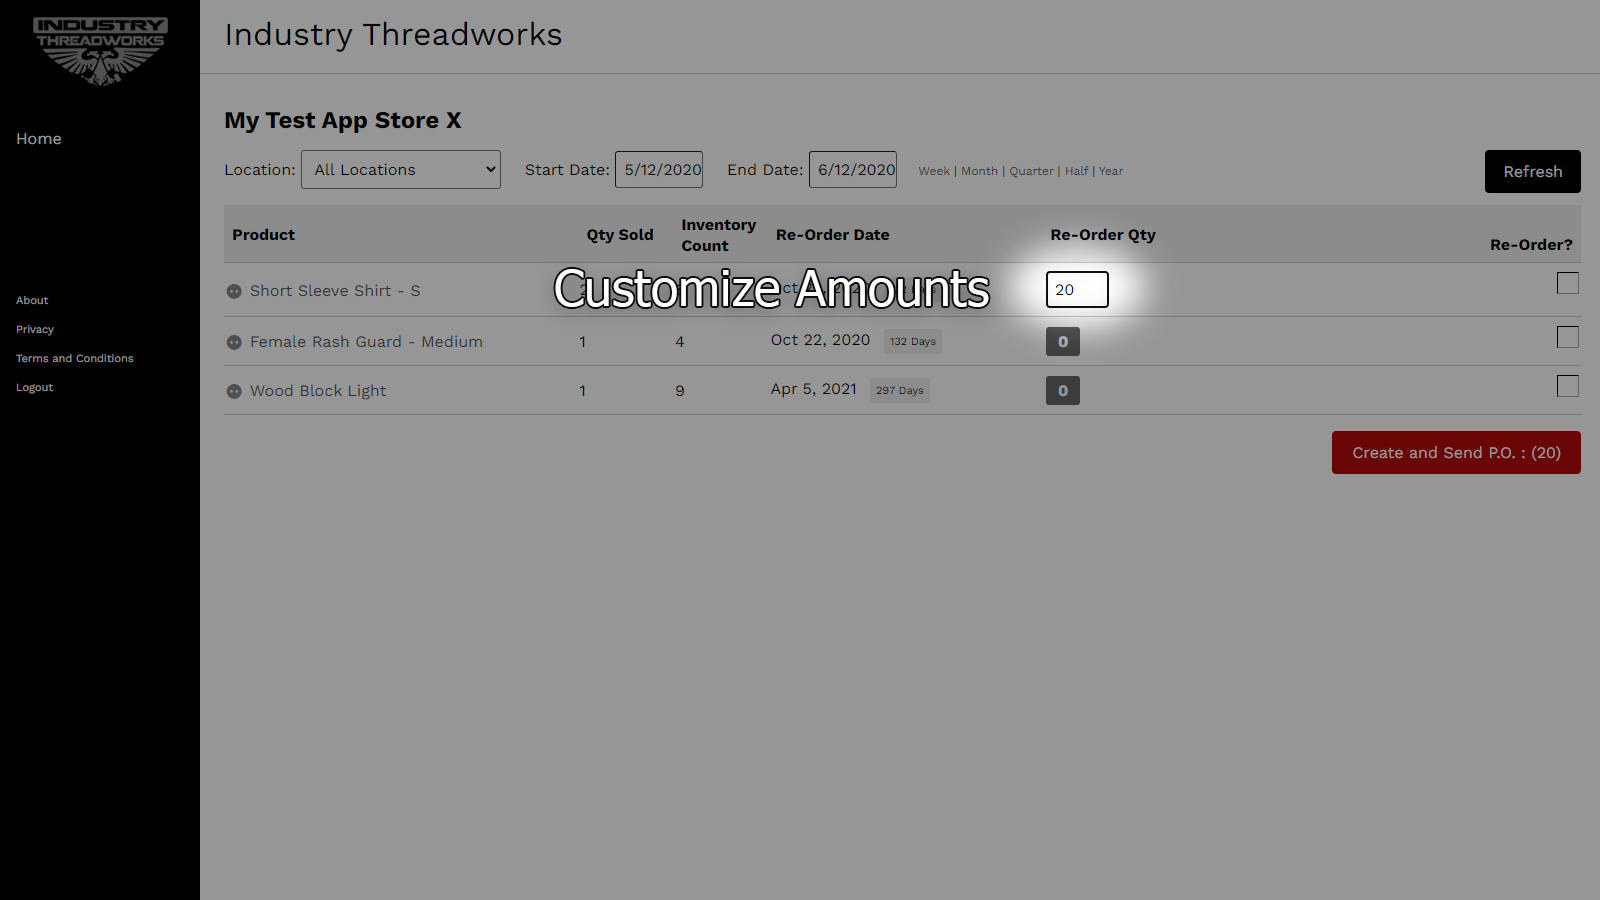 Customize amounts to reorder